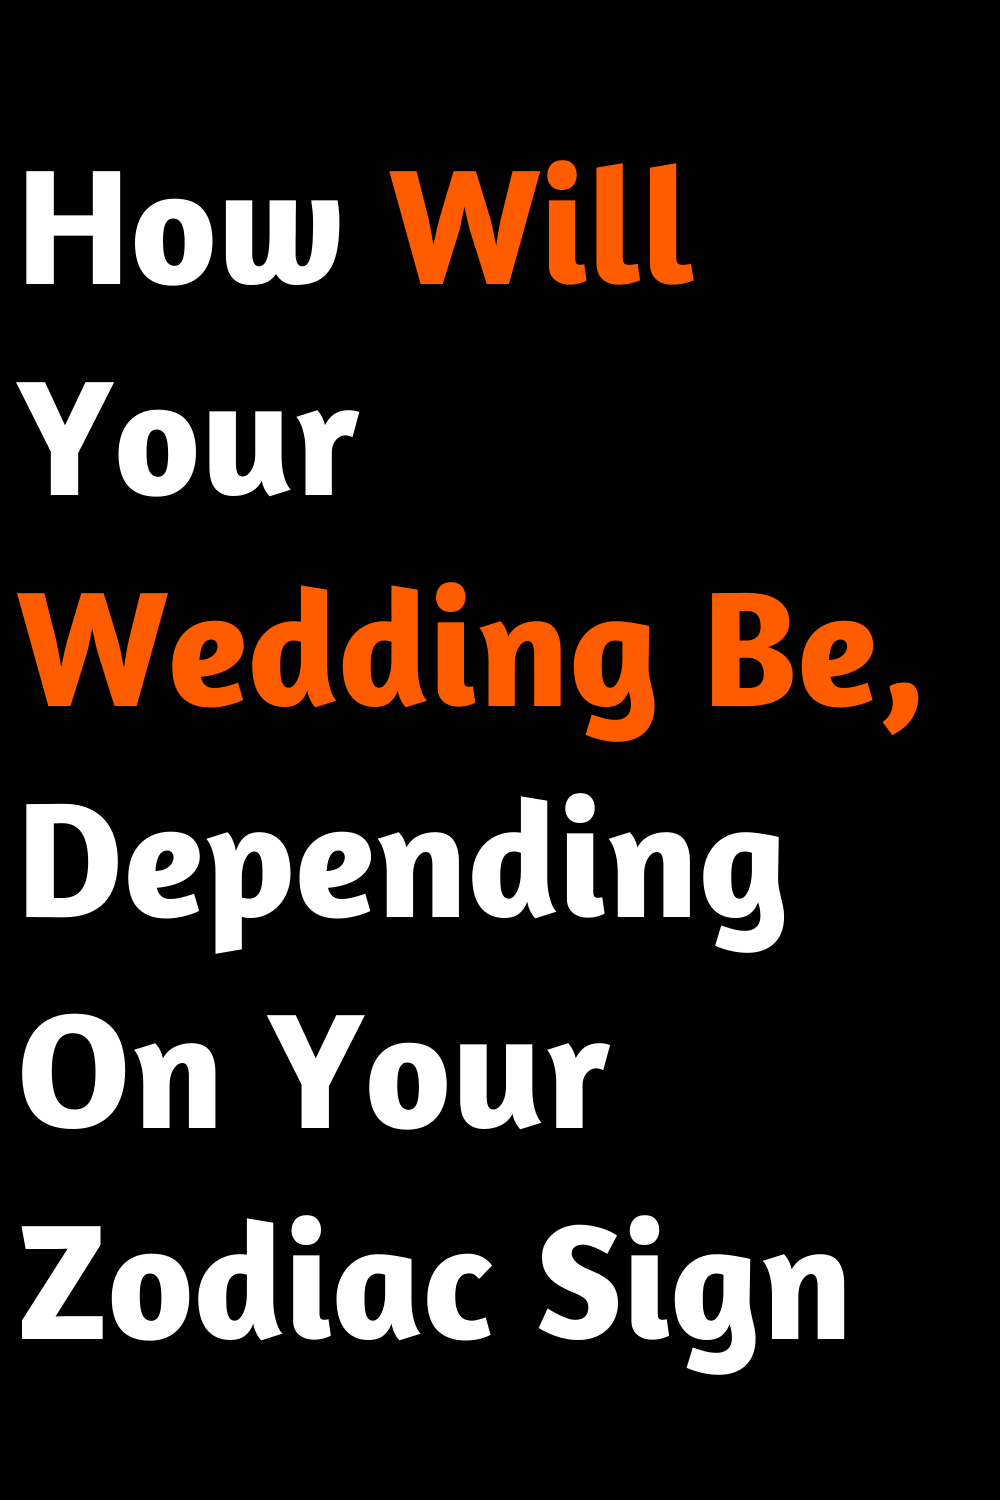 How Will Your Wedding Be, Depending On Your Zodiac Sign